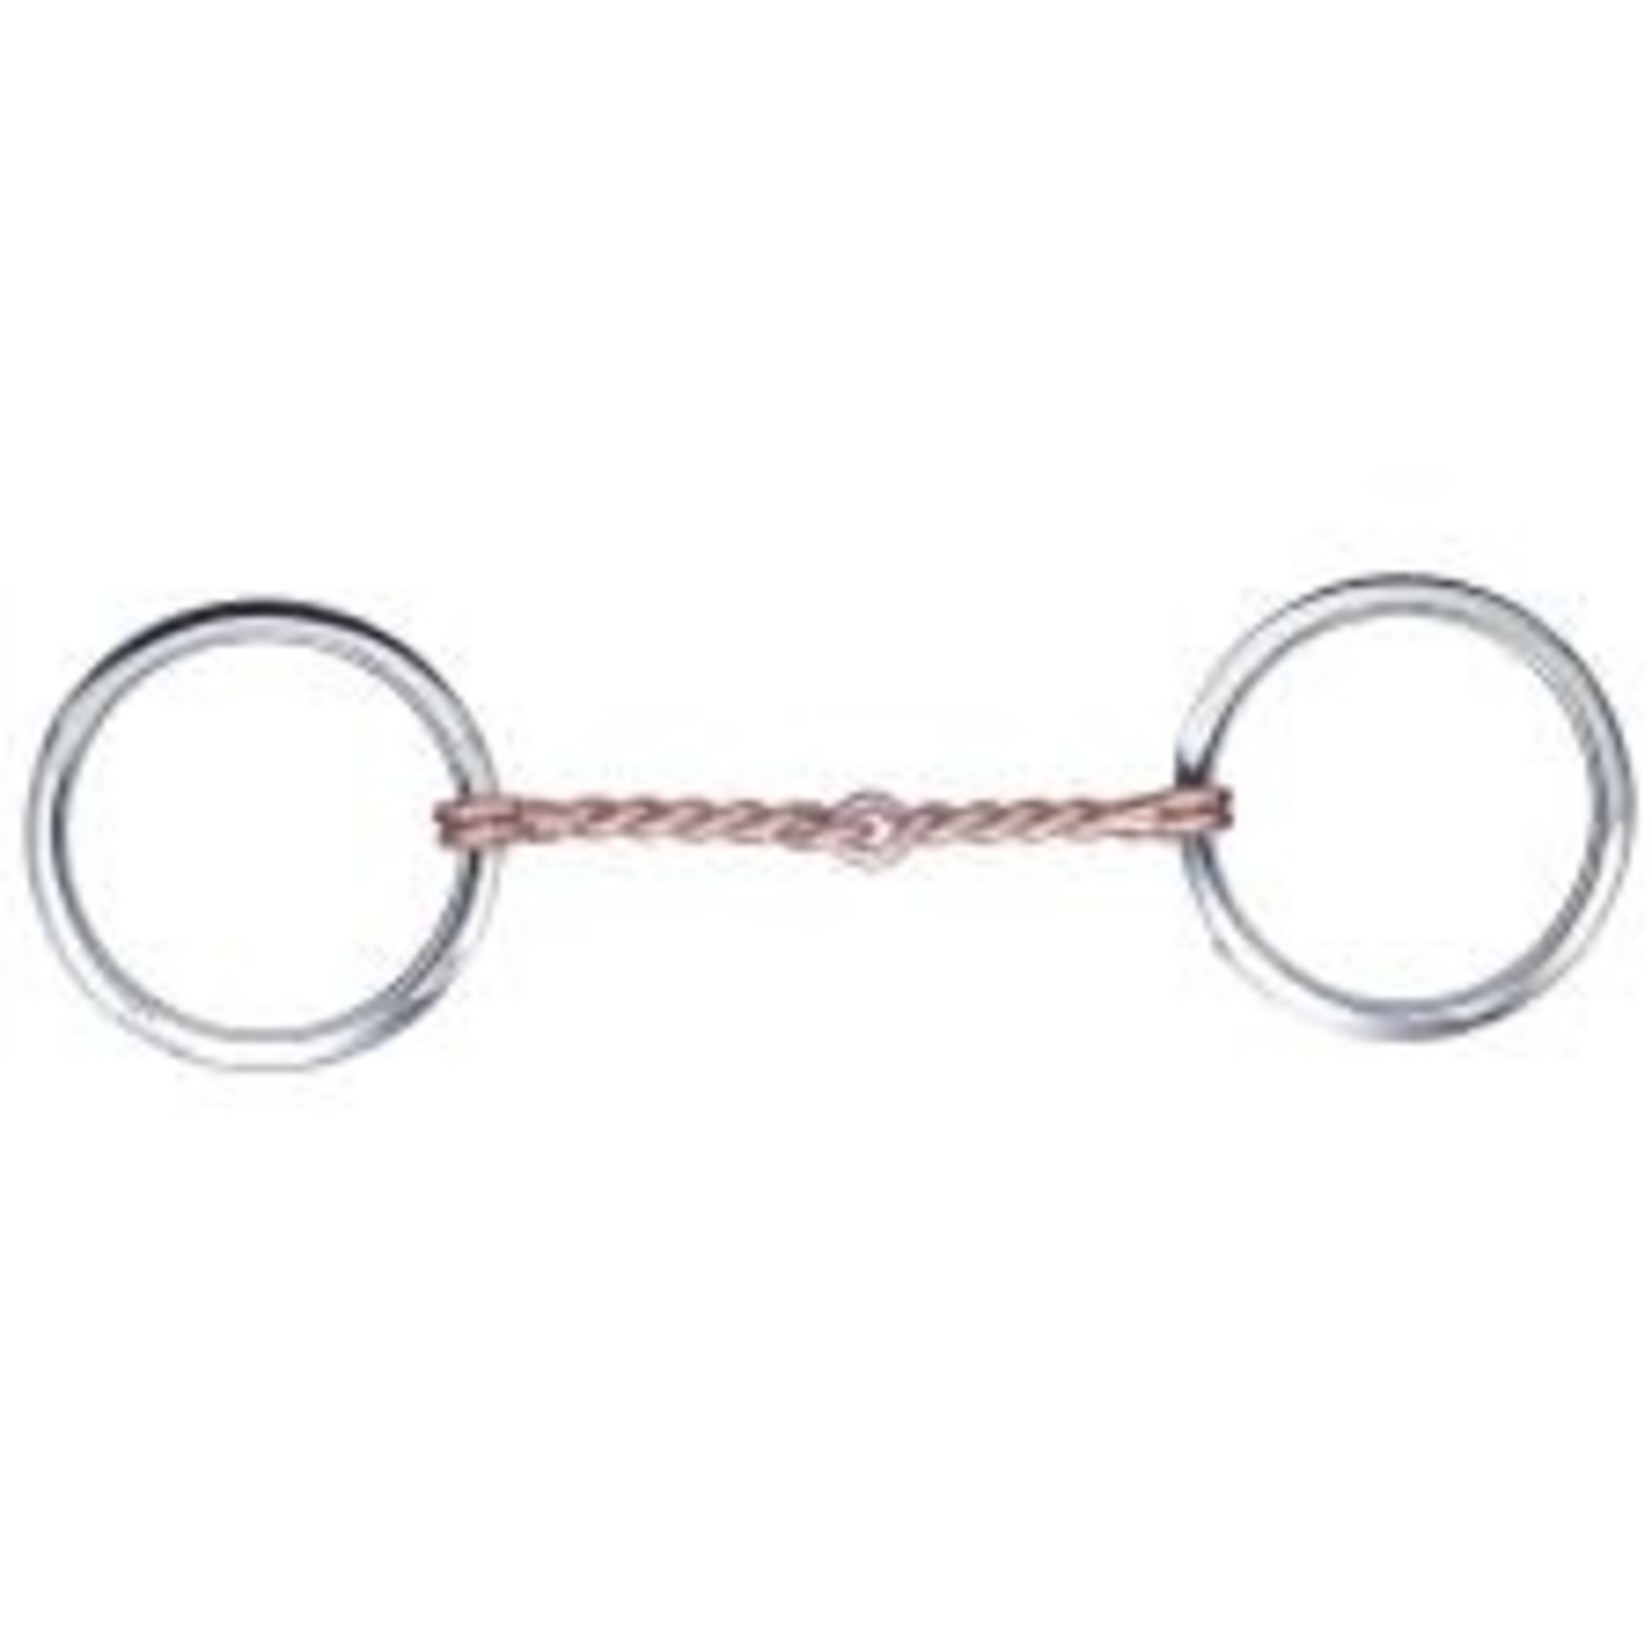 Metalab Stainless Steel Wire Snaffle